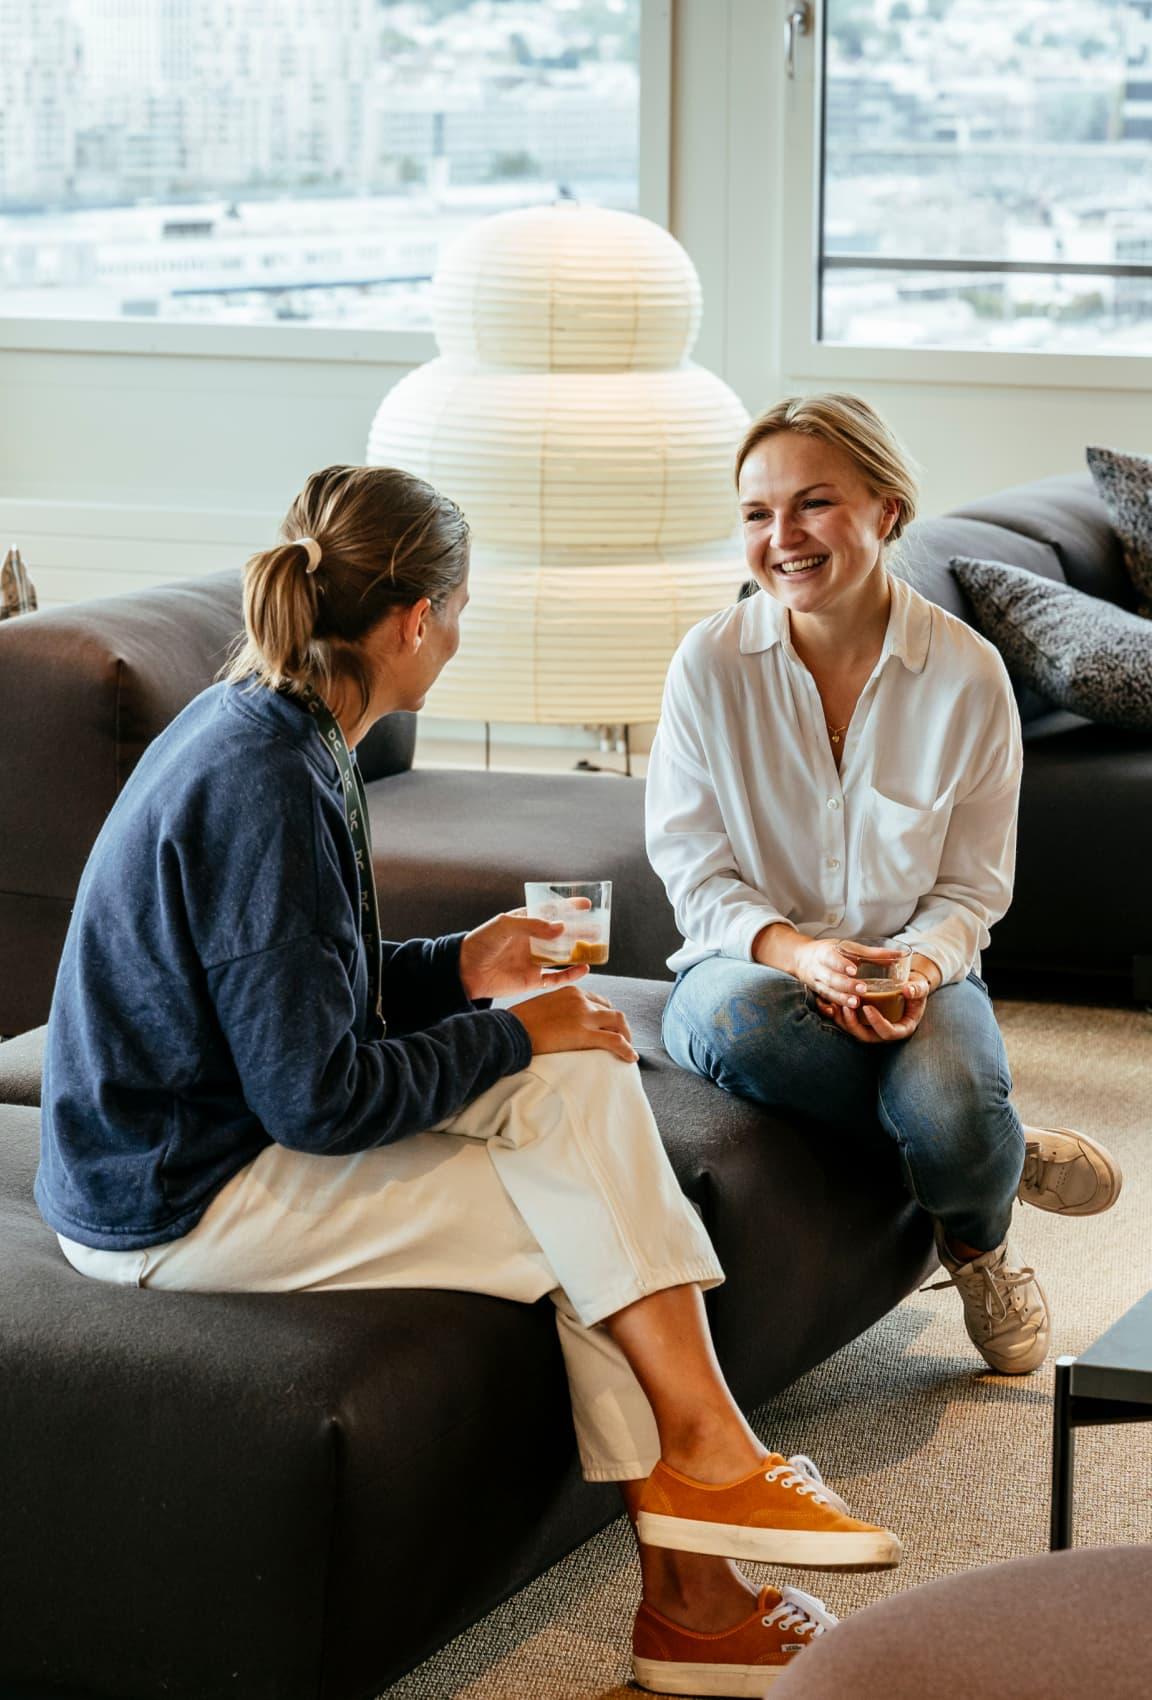 Two women having a conversation on a sofa whilst smiling.